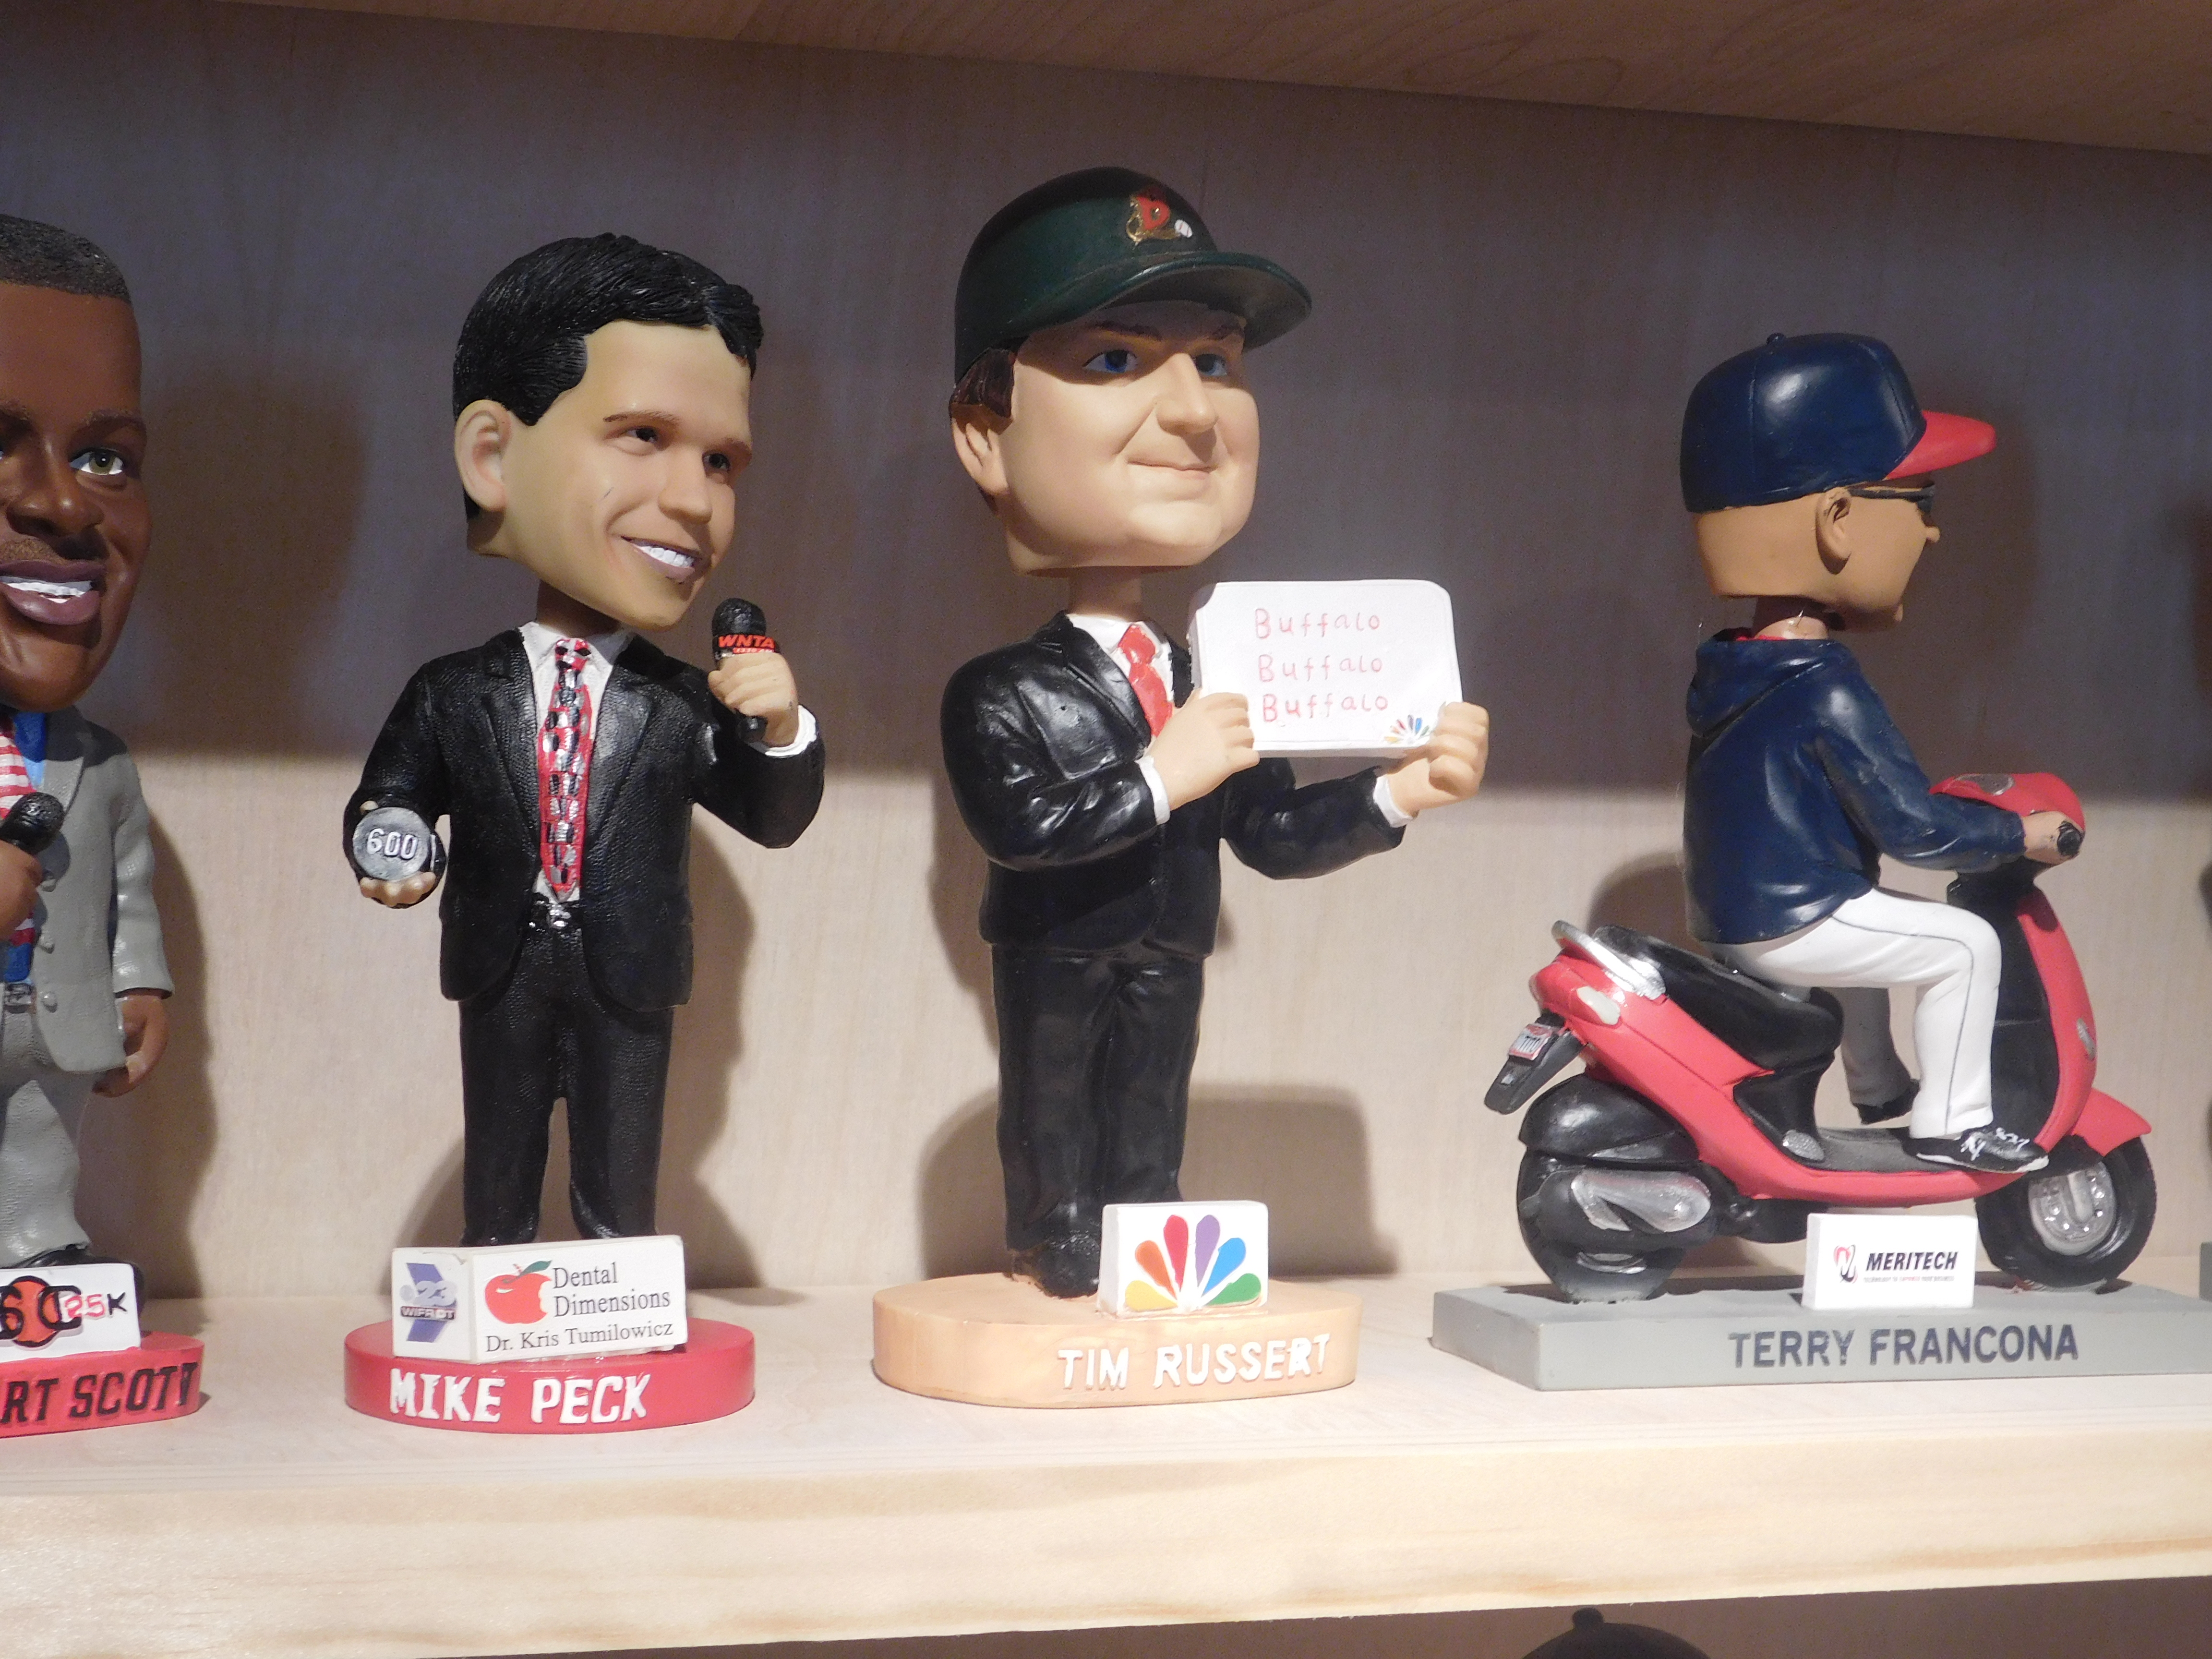 Ranking top 15 bobbleheads from the new Twins Hall of Fame set